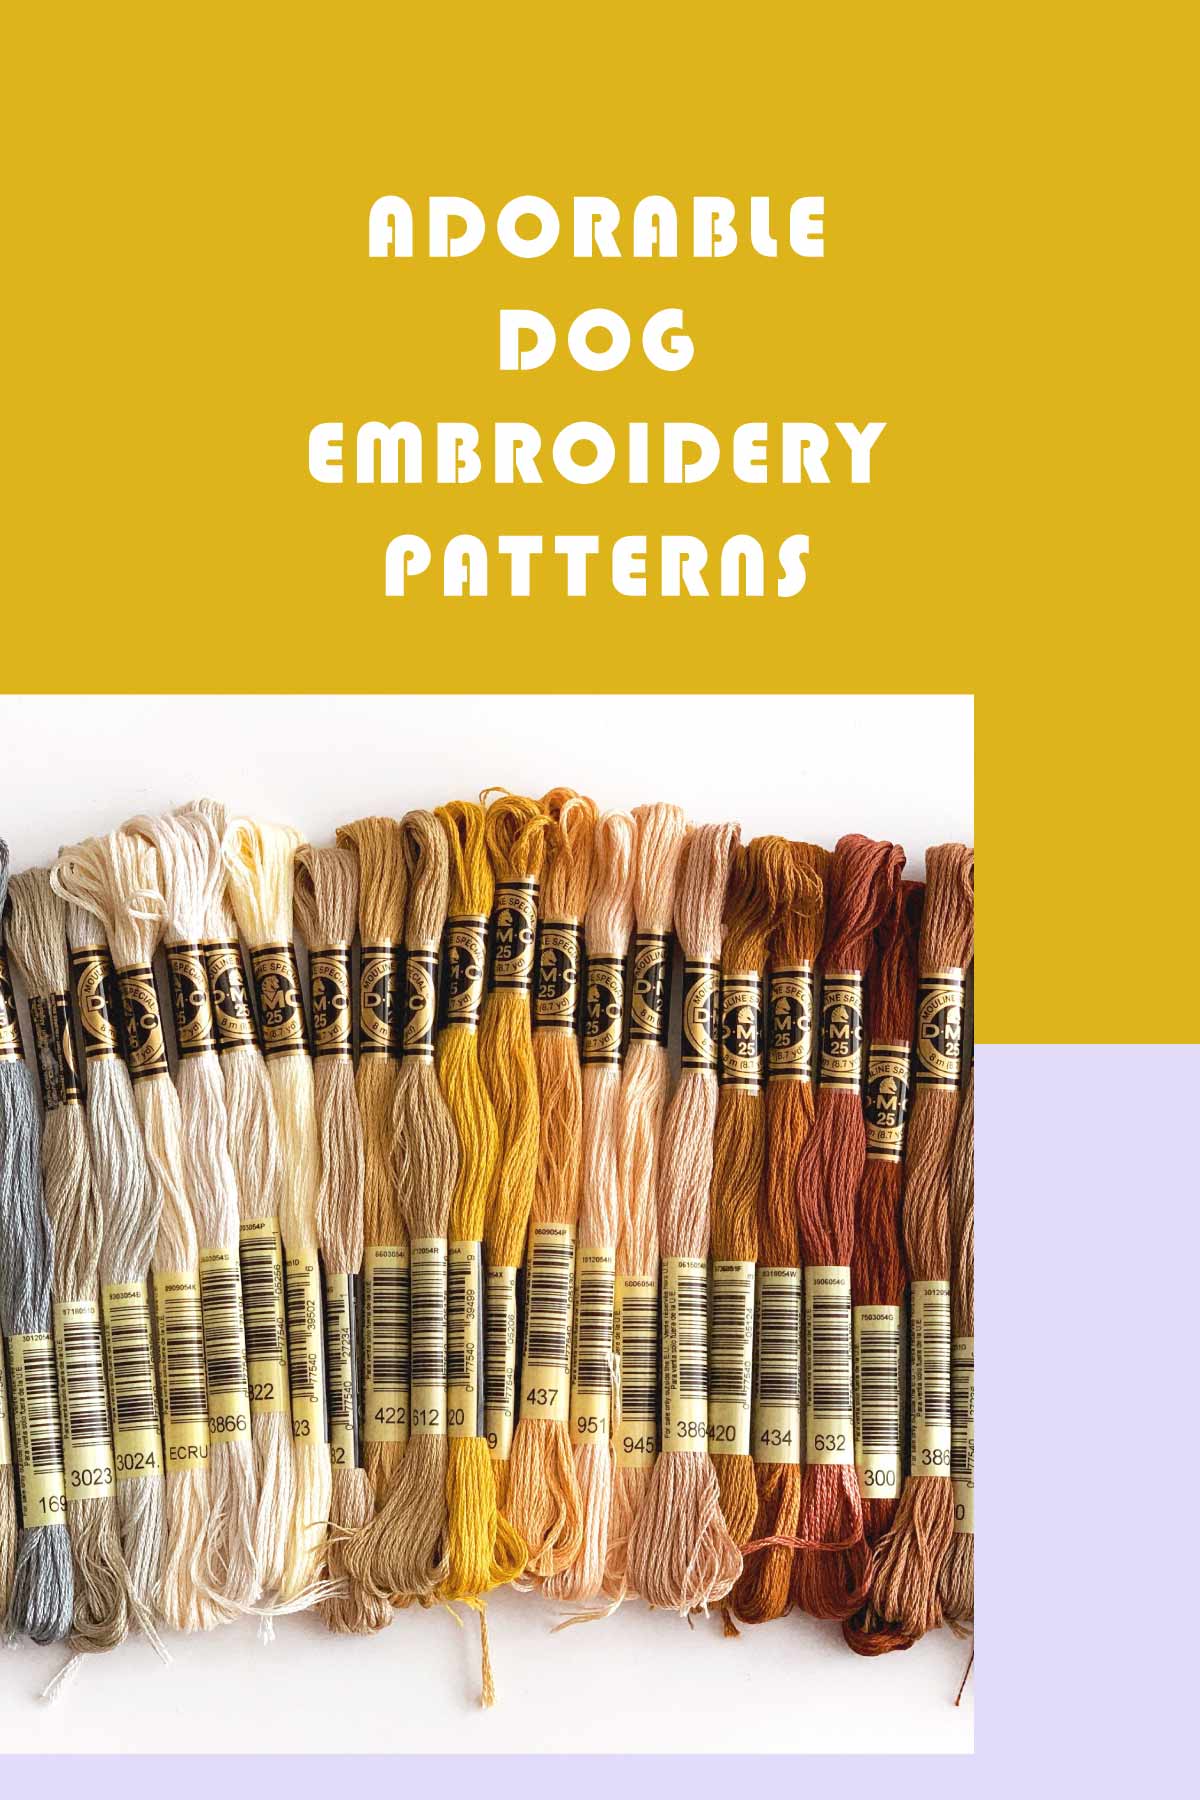 Supplies for dog embroidery patterns